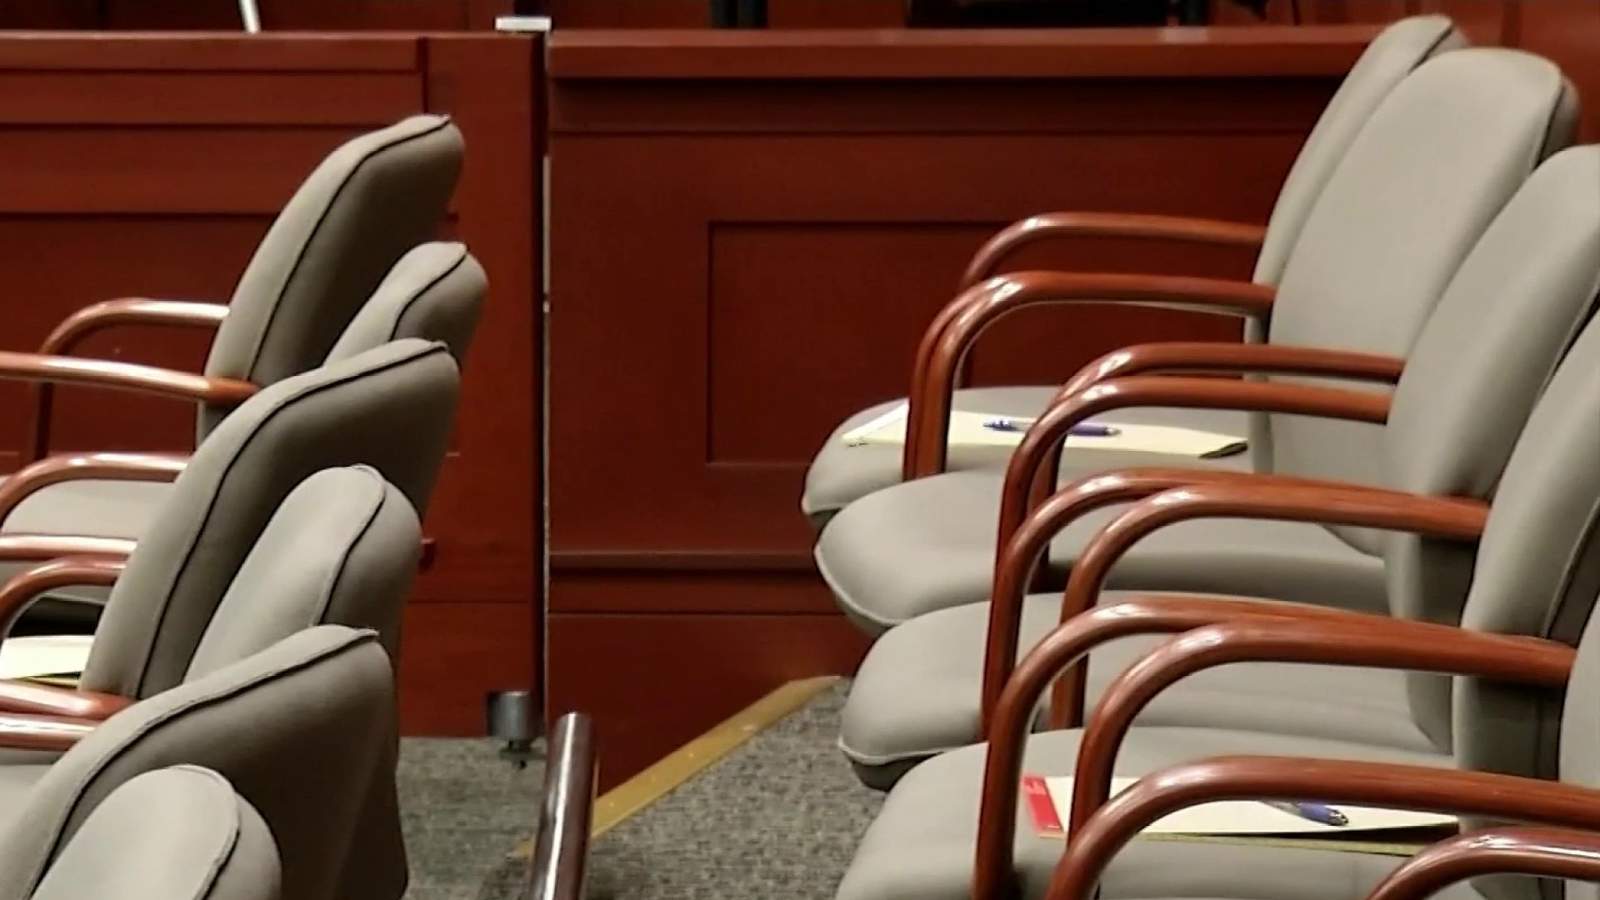 Teen Court offers alternative to first-time youth offenders